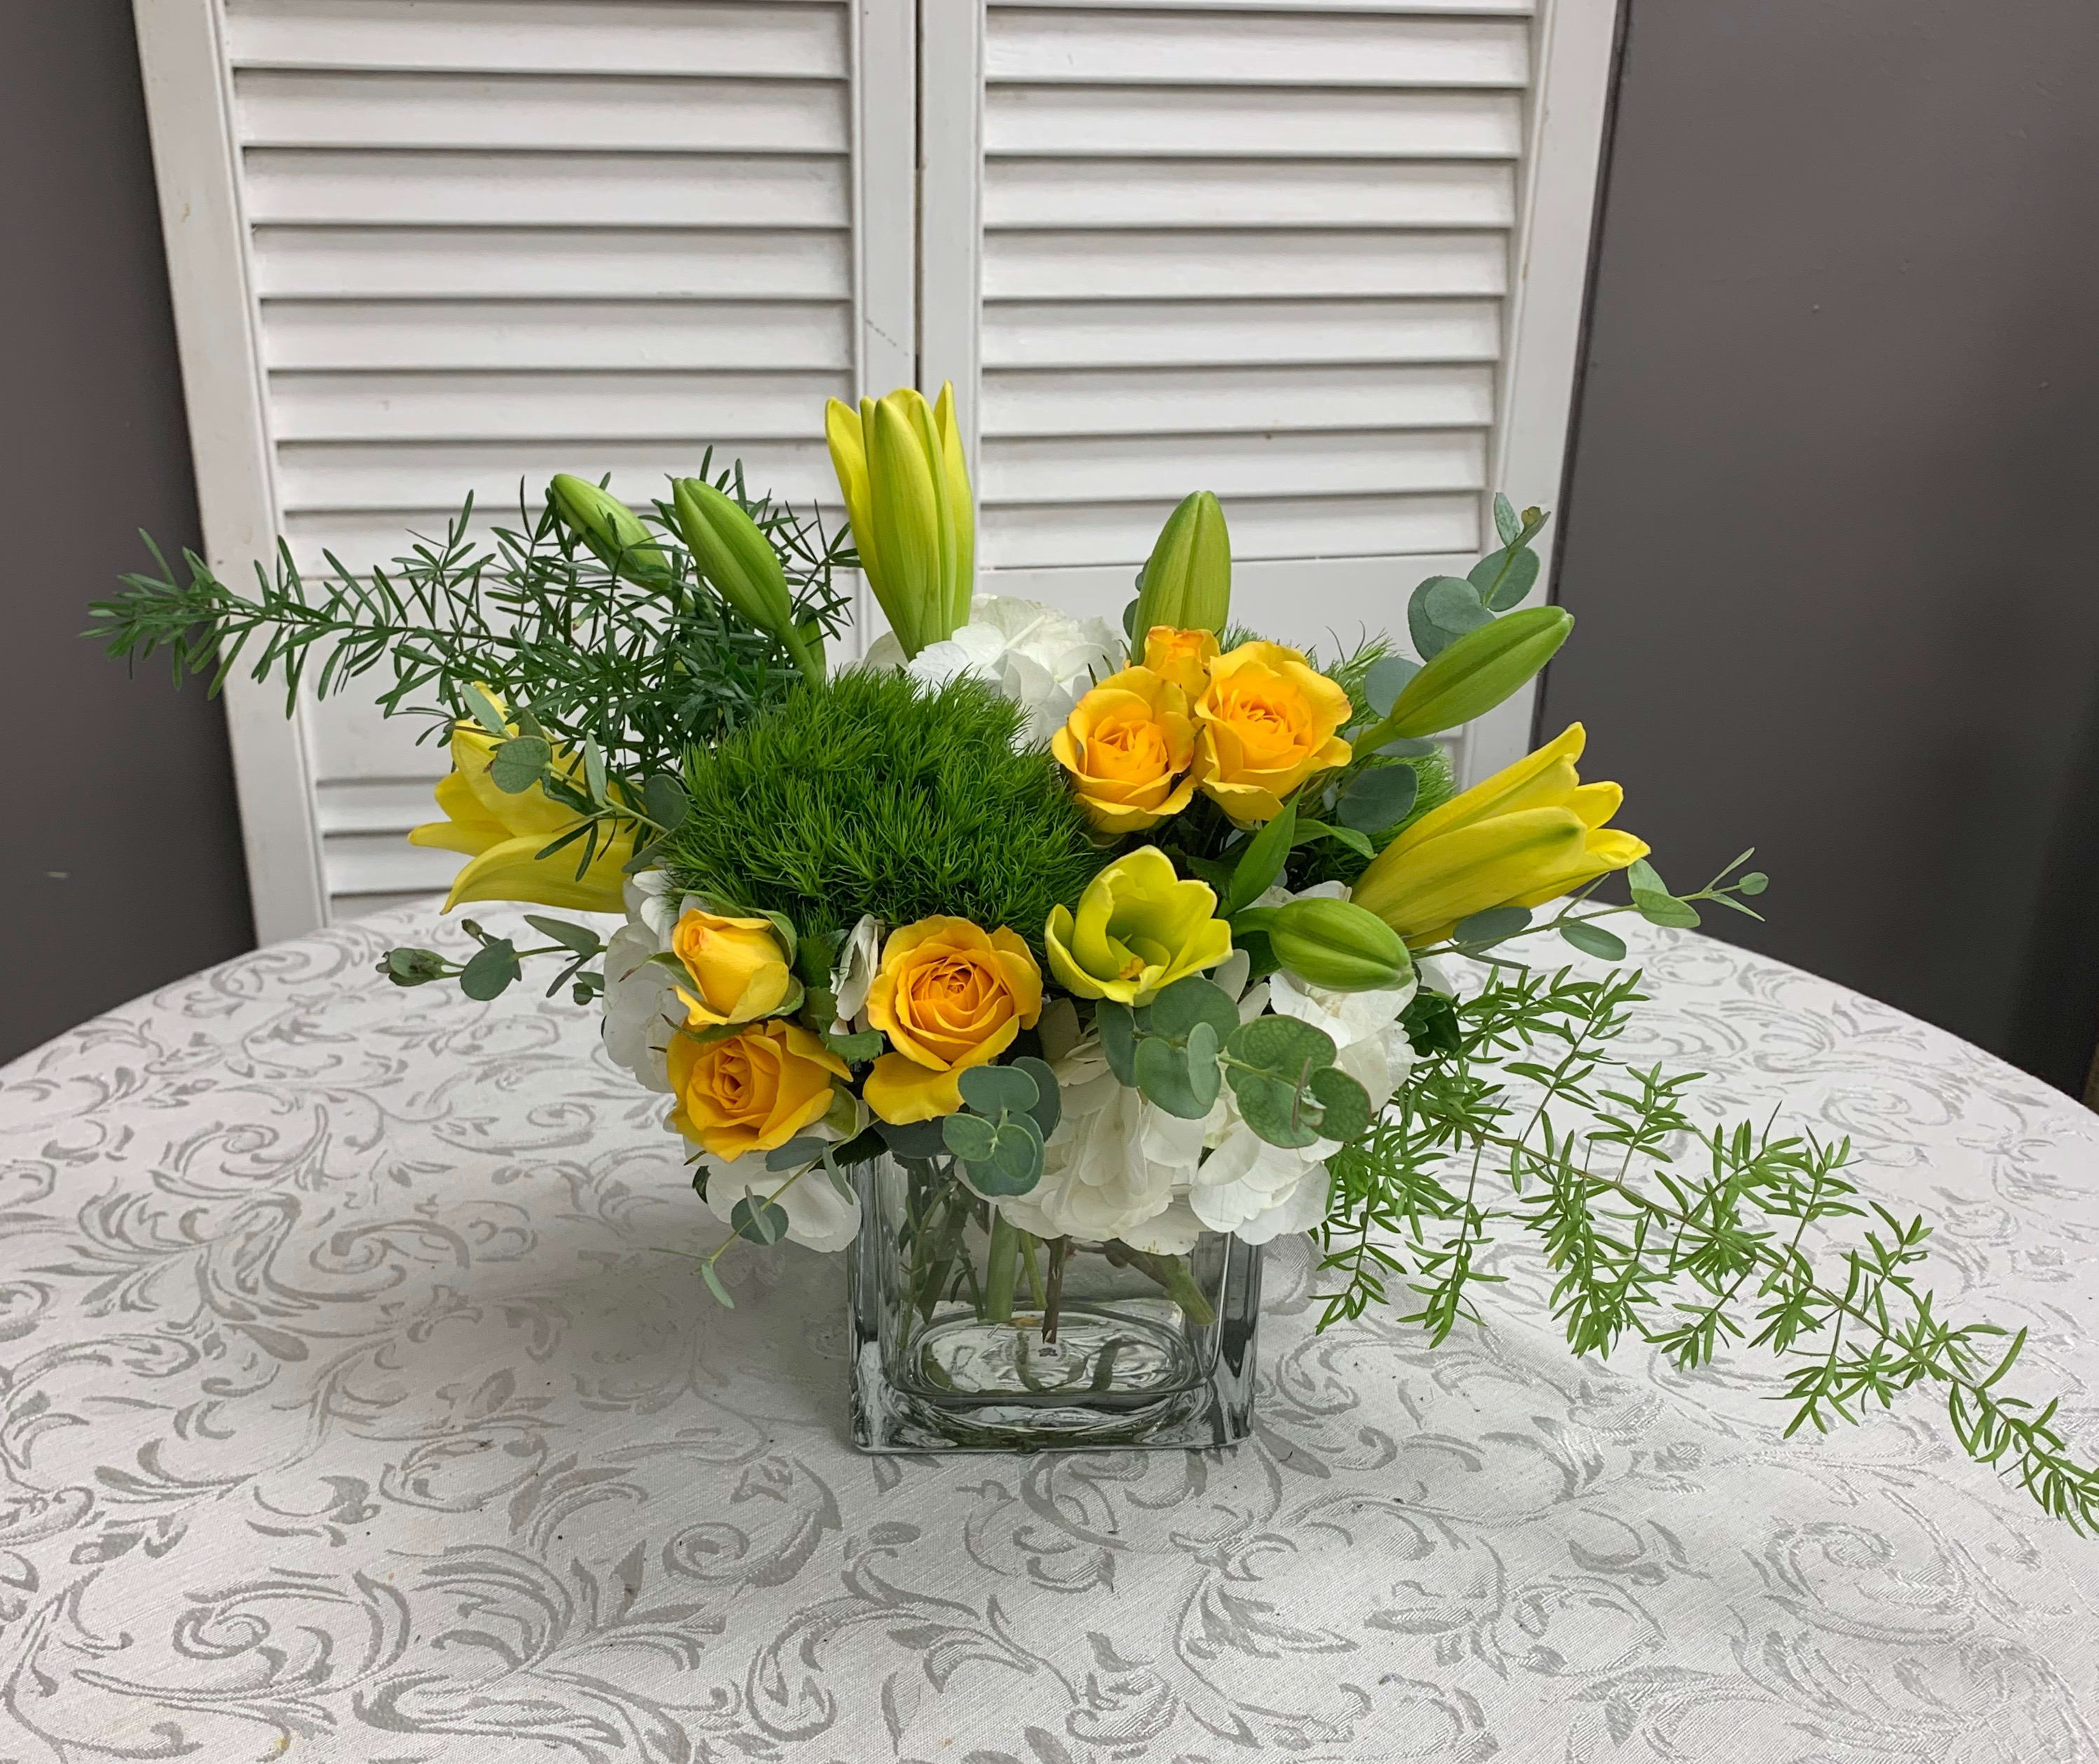 Sunshine Dreams - Arrangement is created with Hydrangeas, Lilies, Spray Roses and Dianthus.